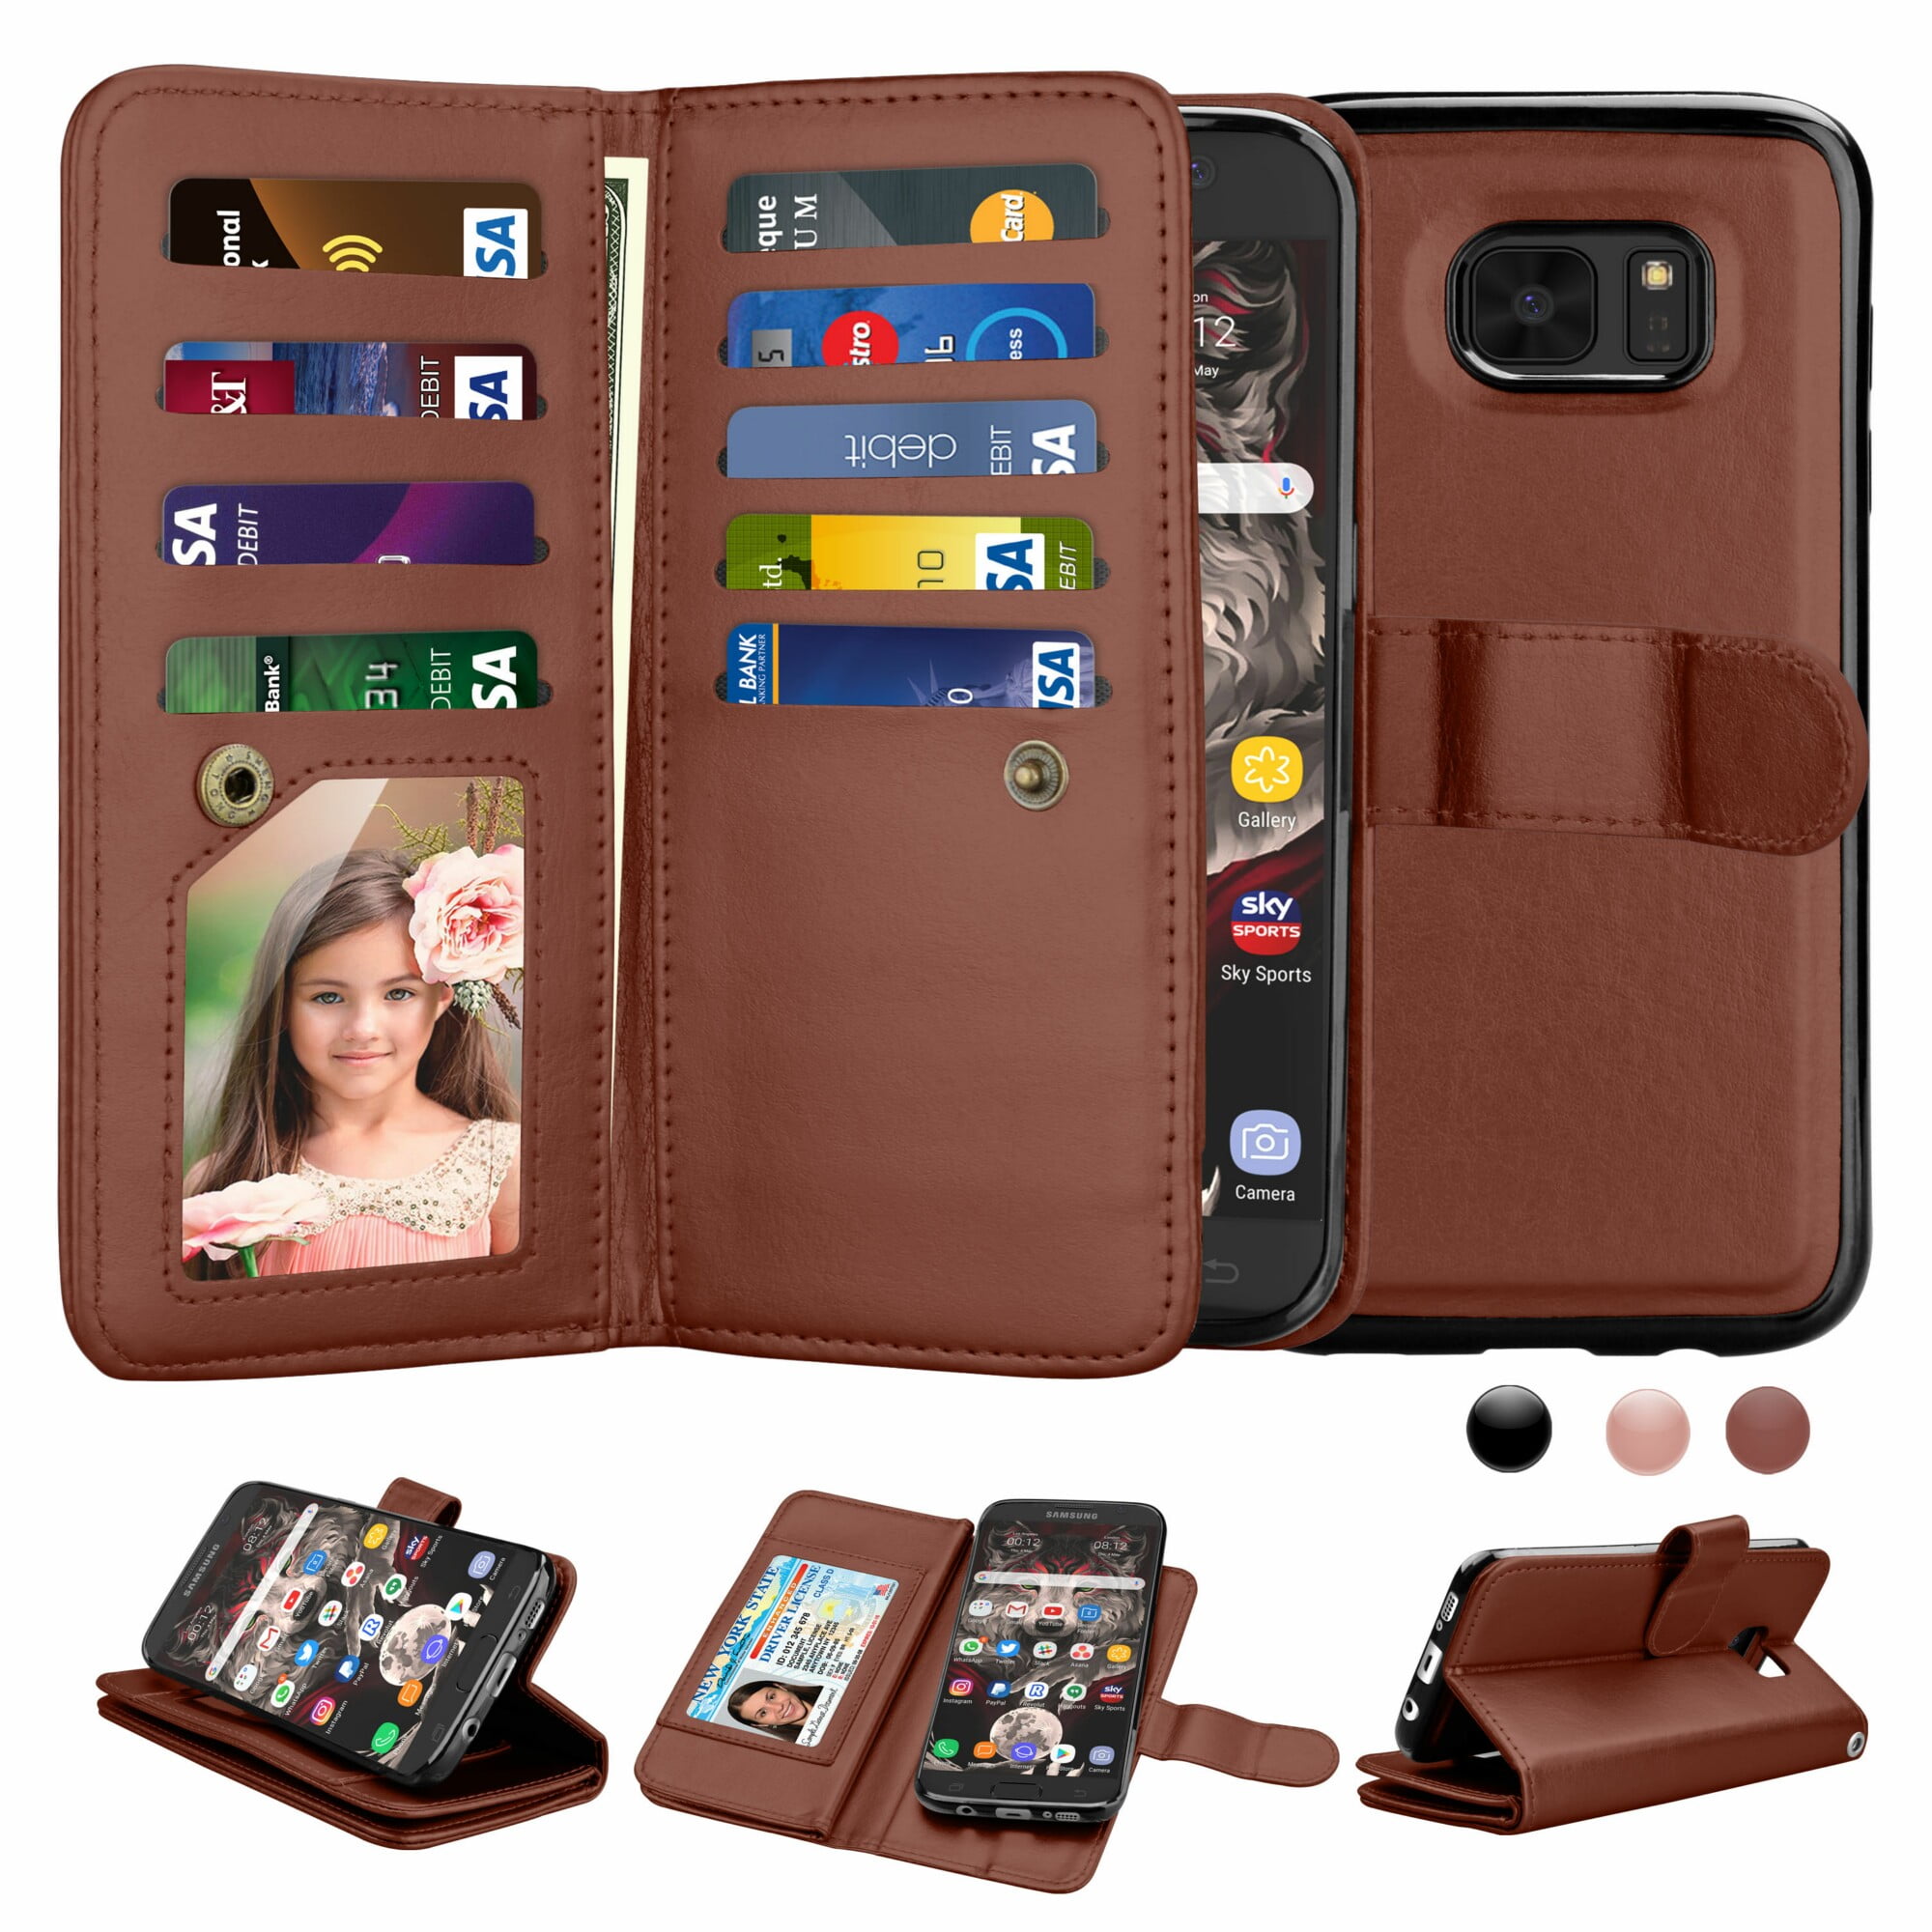 Cover for Samsung Galaxy S7 Edge Leather Mobile Phone case Luxury Business Card Holders Kickstand with Free Waterproof-Bag Classical Samsung Galaxy S7 Edge Flip Case 